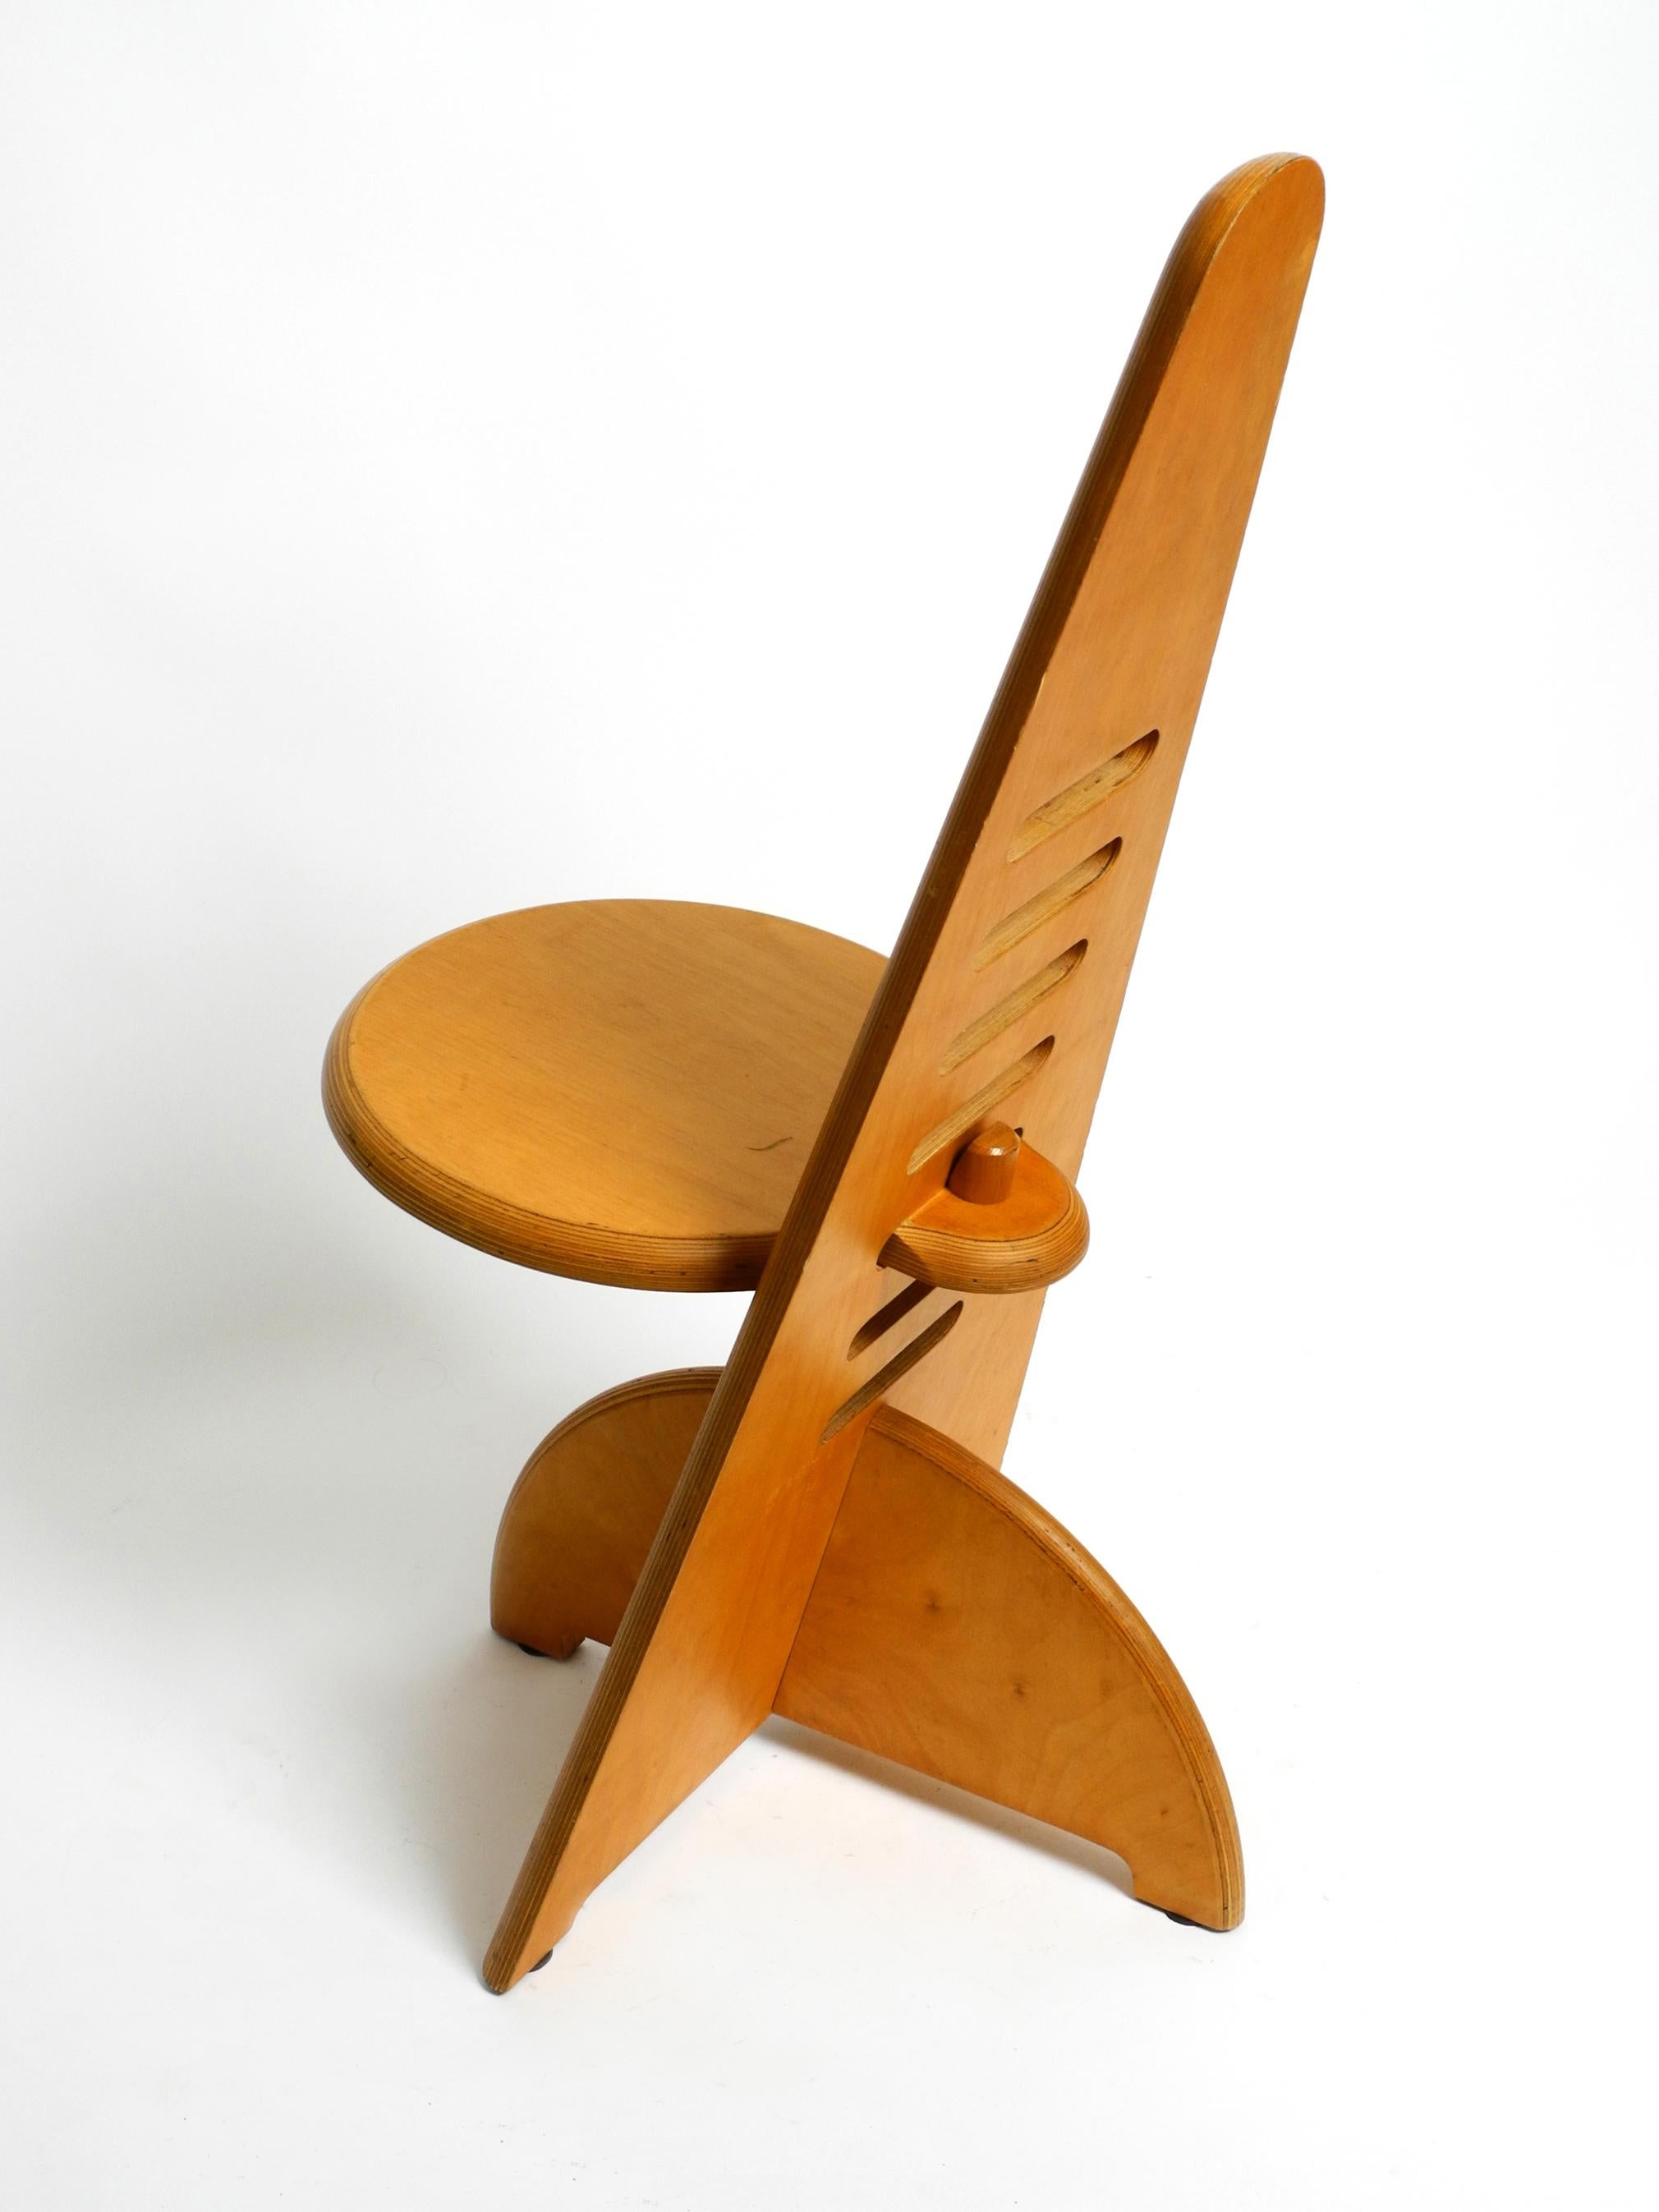 Dutch Beautiful 1970s Lundi Sit Chair Designed by Gijs Boelaars for Lundia Netherlands